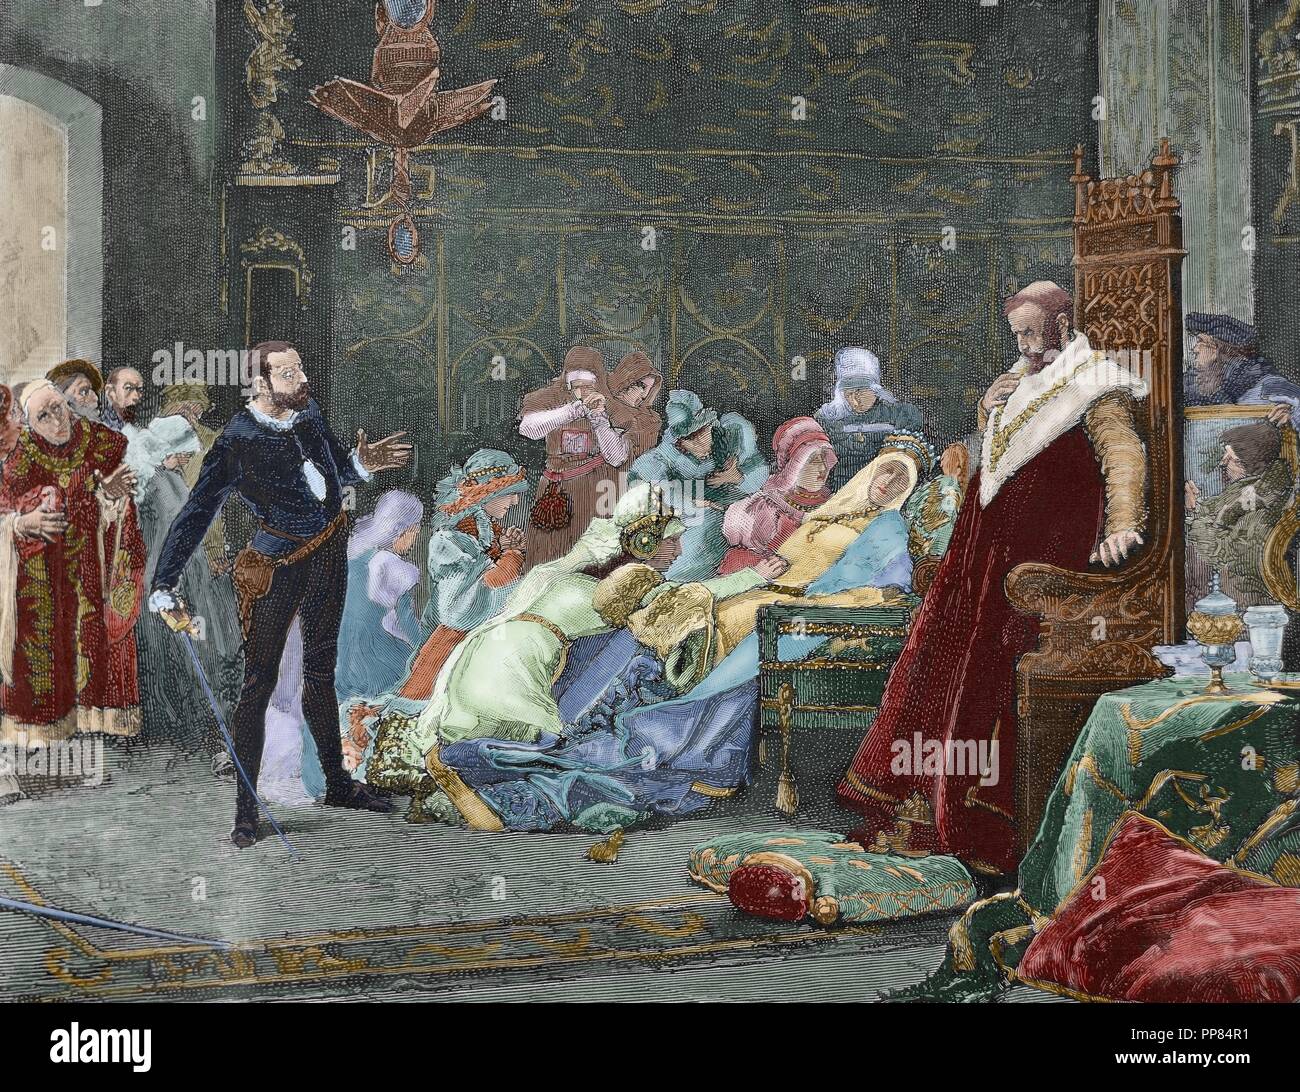 William Shakespeare (1564-1616). English writer. Hamlet. Queen Gertrude dies poisoned after drinking to the health of Hamlet for his victory in the duel with Laertes. Engraving after painting by Salvador Sanchez Barbudo "The last scene of Hamlet," 1884. Engraving, 19th century. Colored. Stock Photo